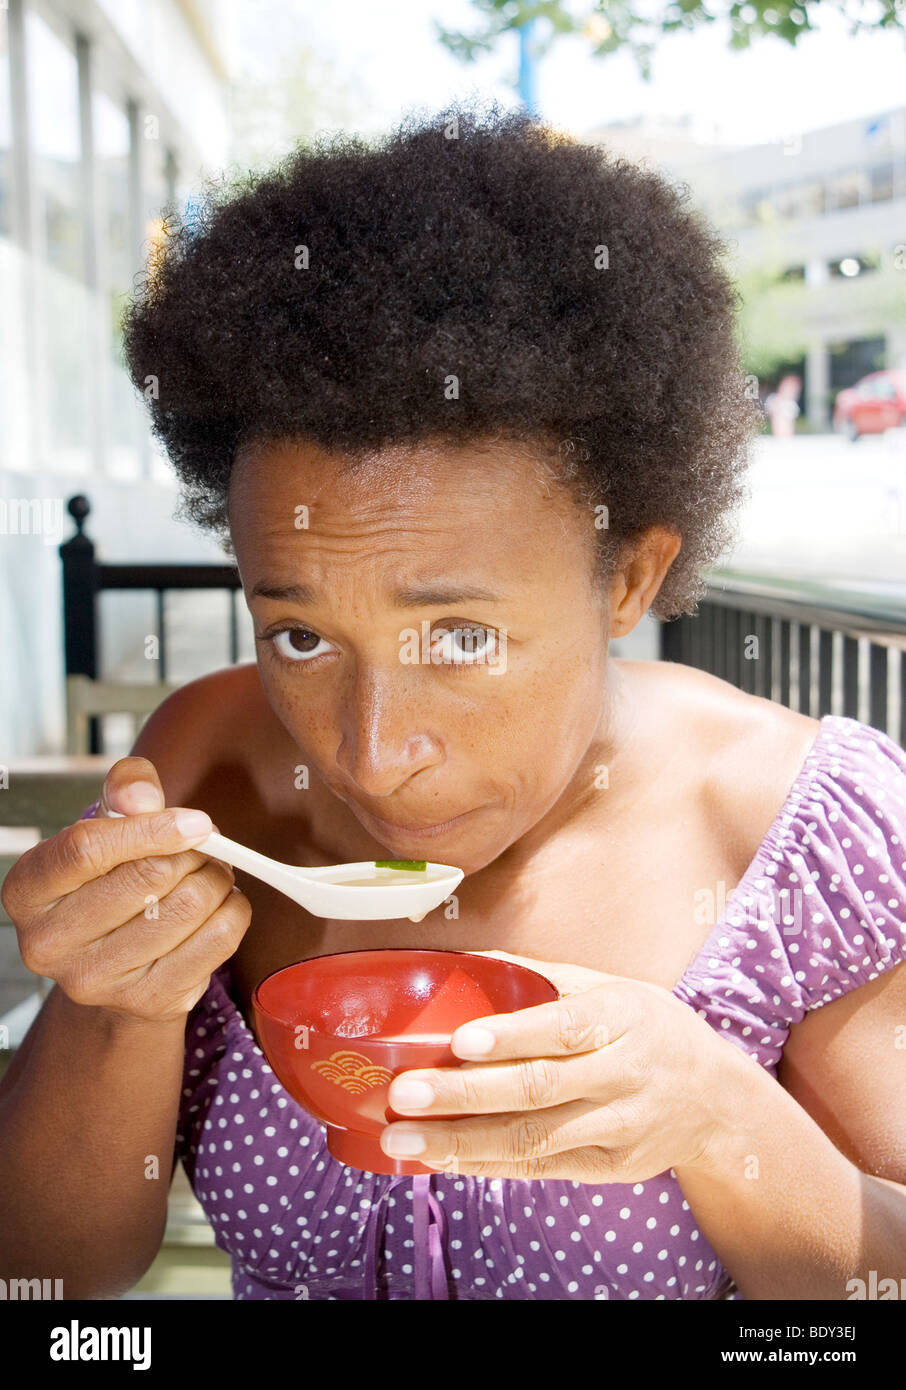 African American woman eating miso soup in outdoor cafe, Vancouver Stock Photo